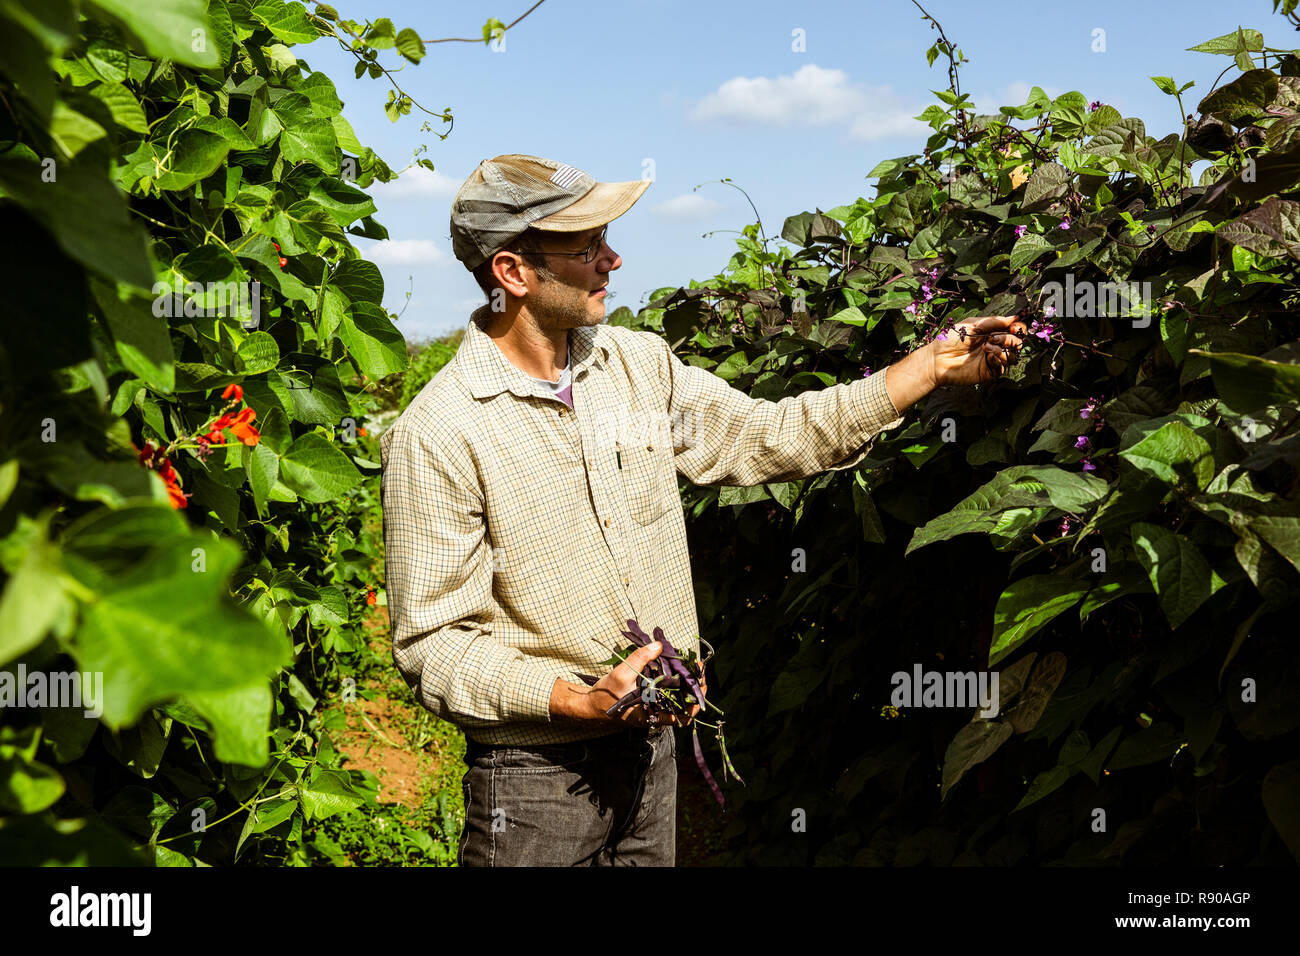 Farmer standing in a field, harvesting purple beans. Stock Photo